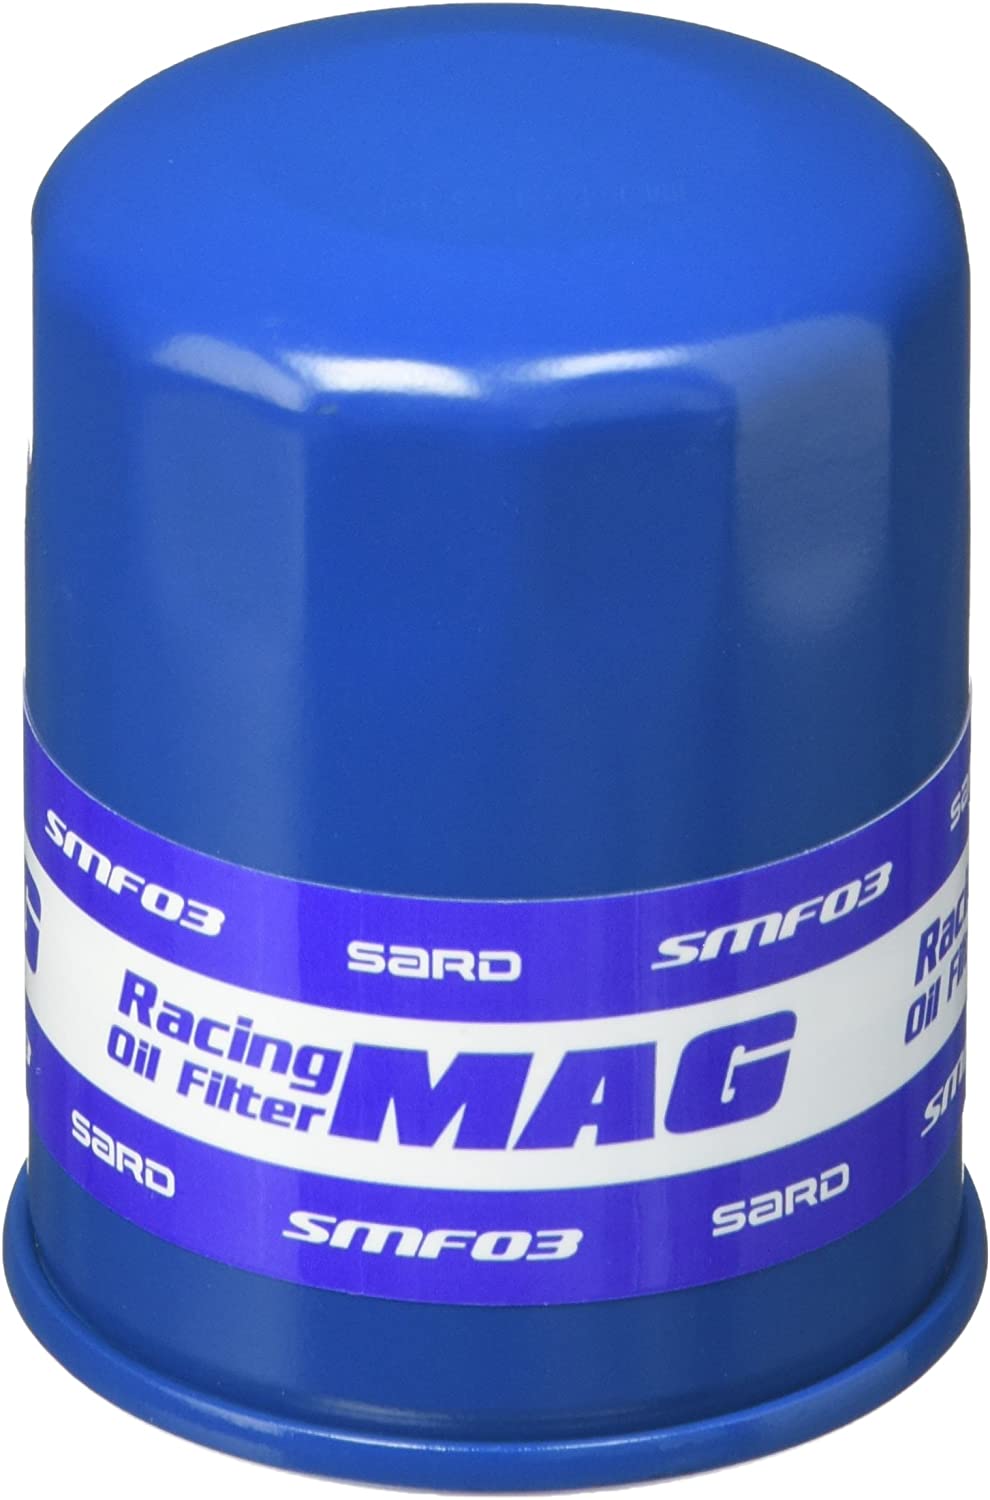 SARD RACING OIL FILTER For LEGACY B4 BE5 BE9 SMF01